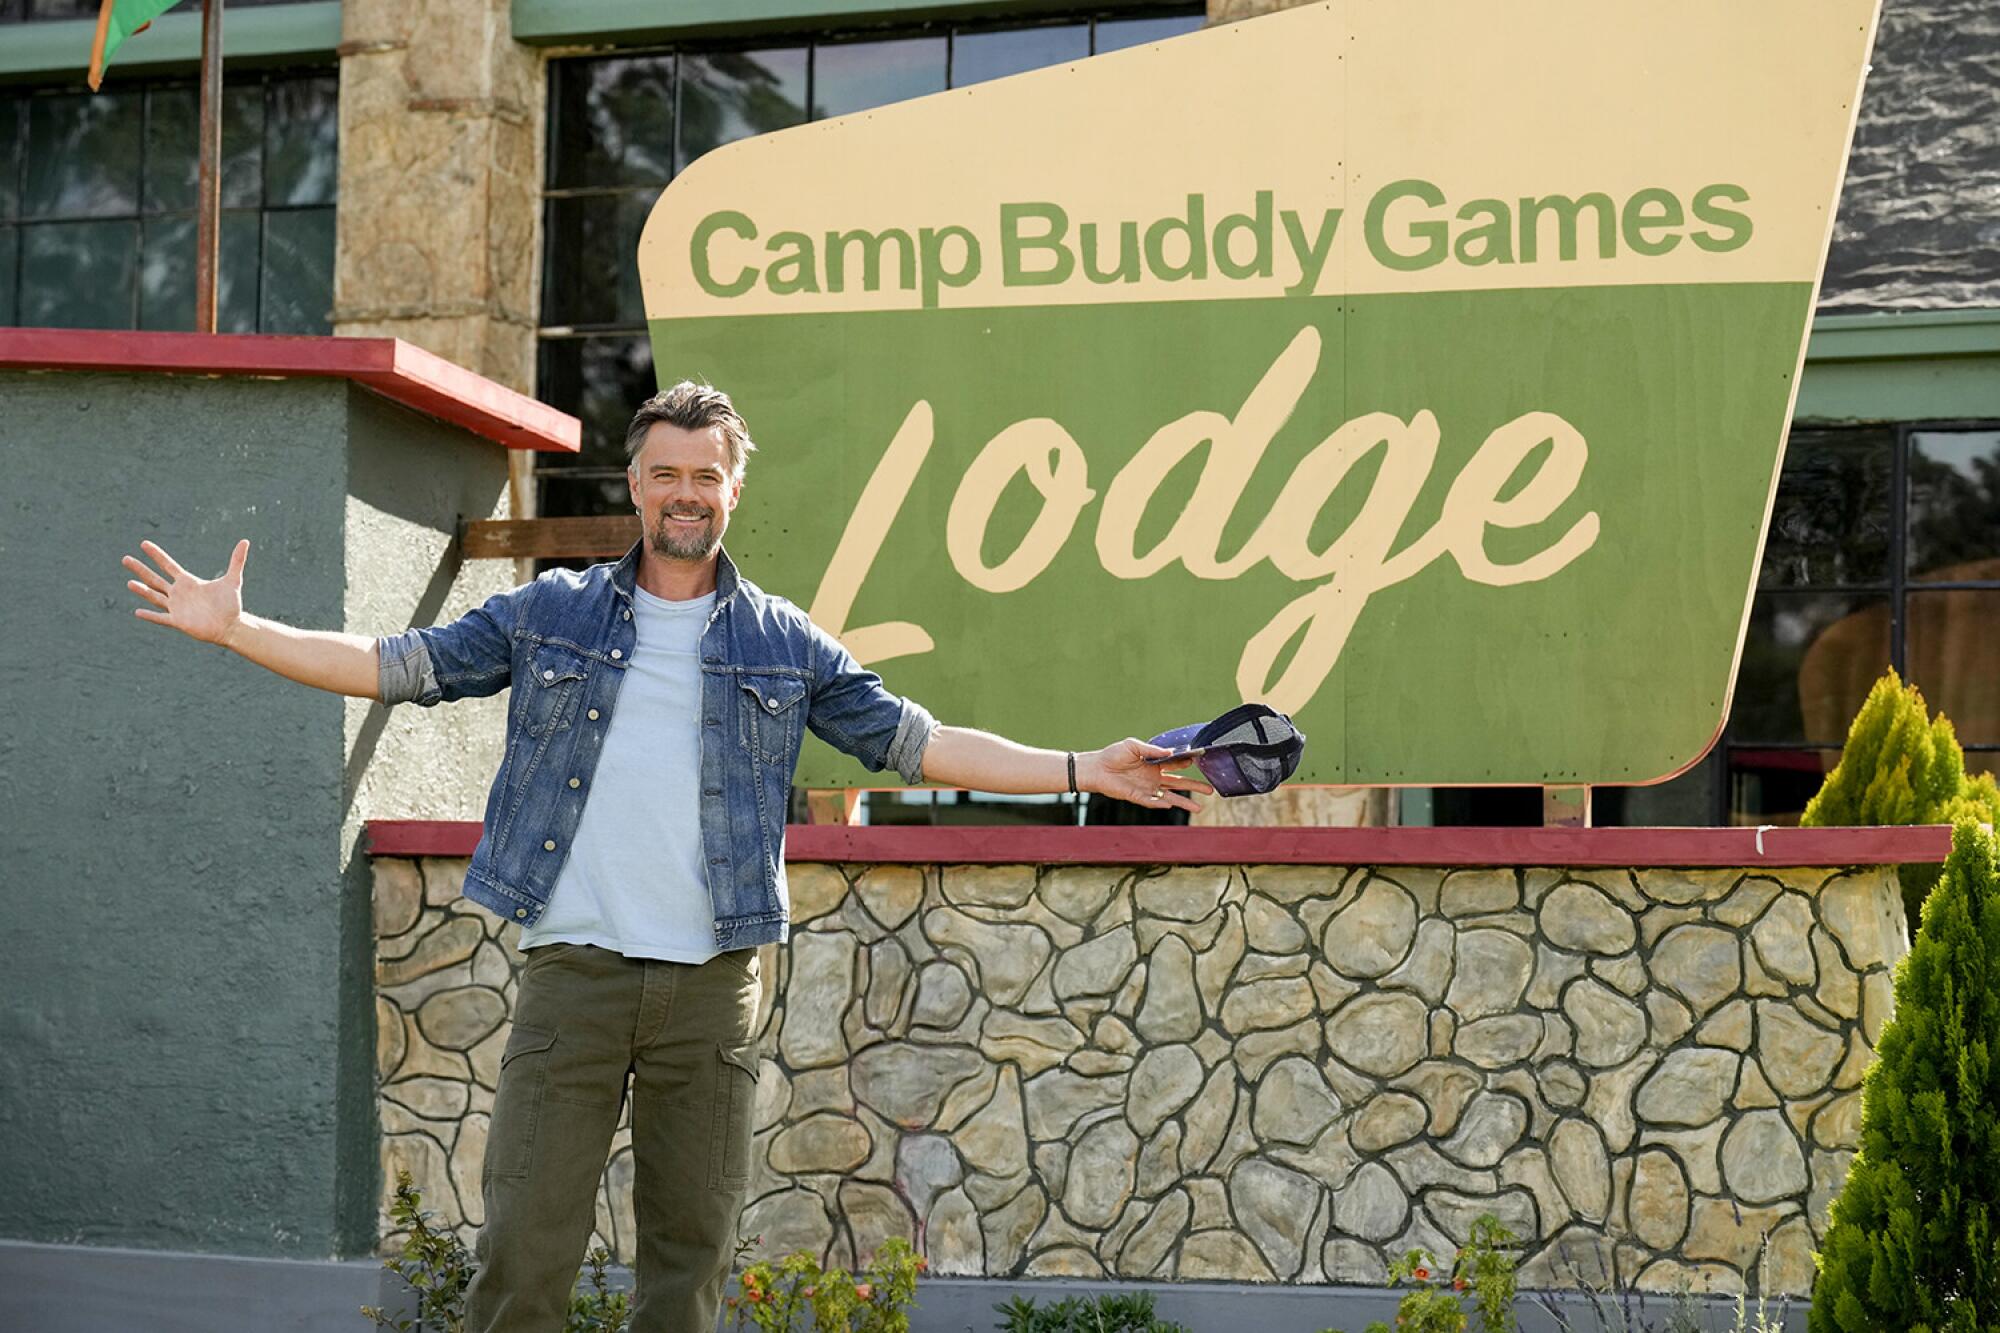 Josh Duhamel stands with his arms open behind a sign that reads "Camp Buddy Games Lodge."